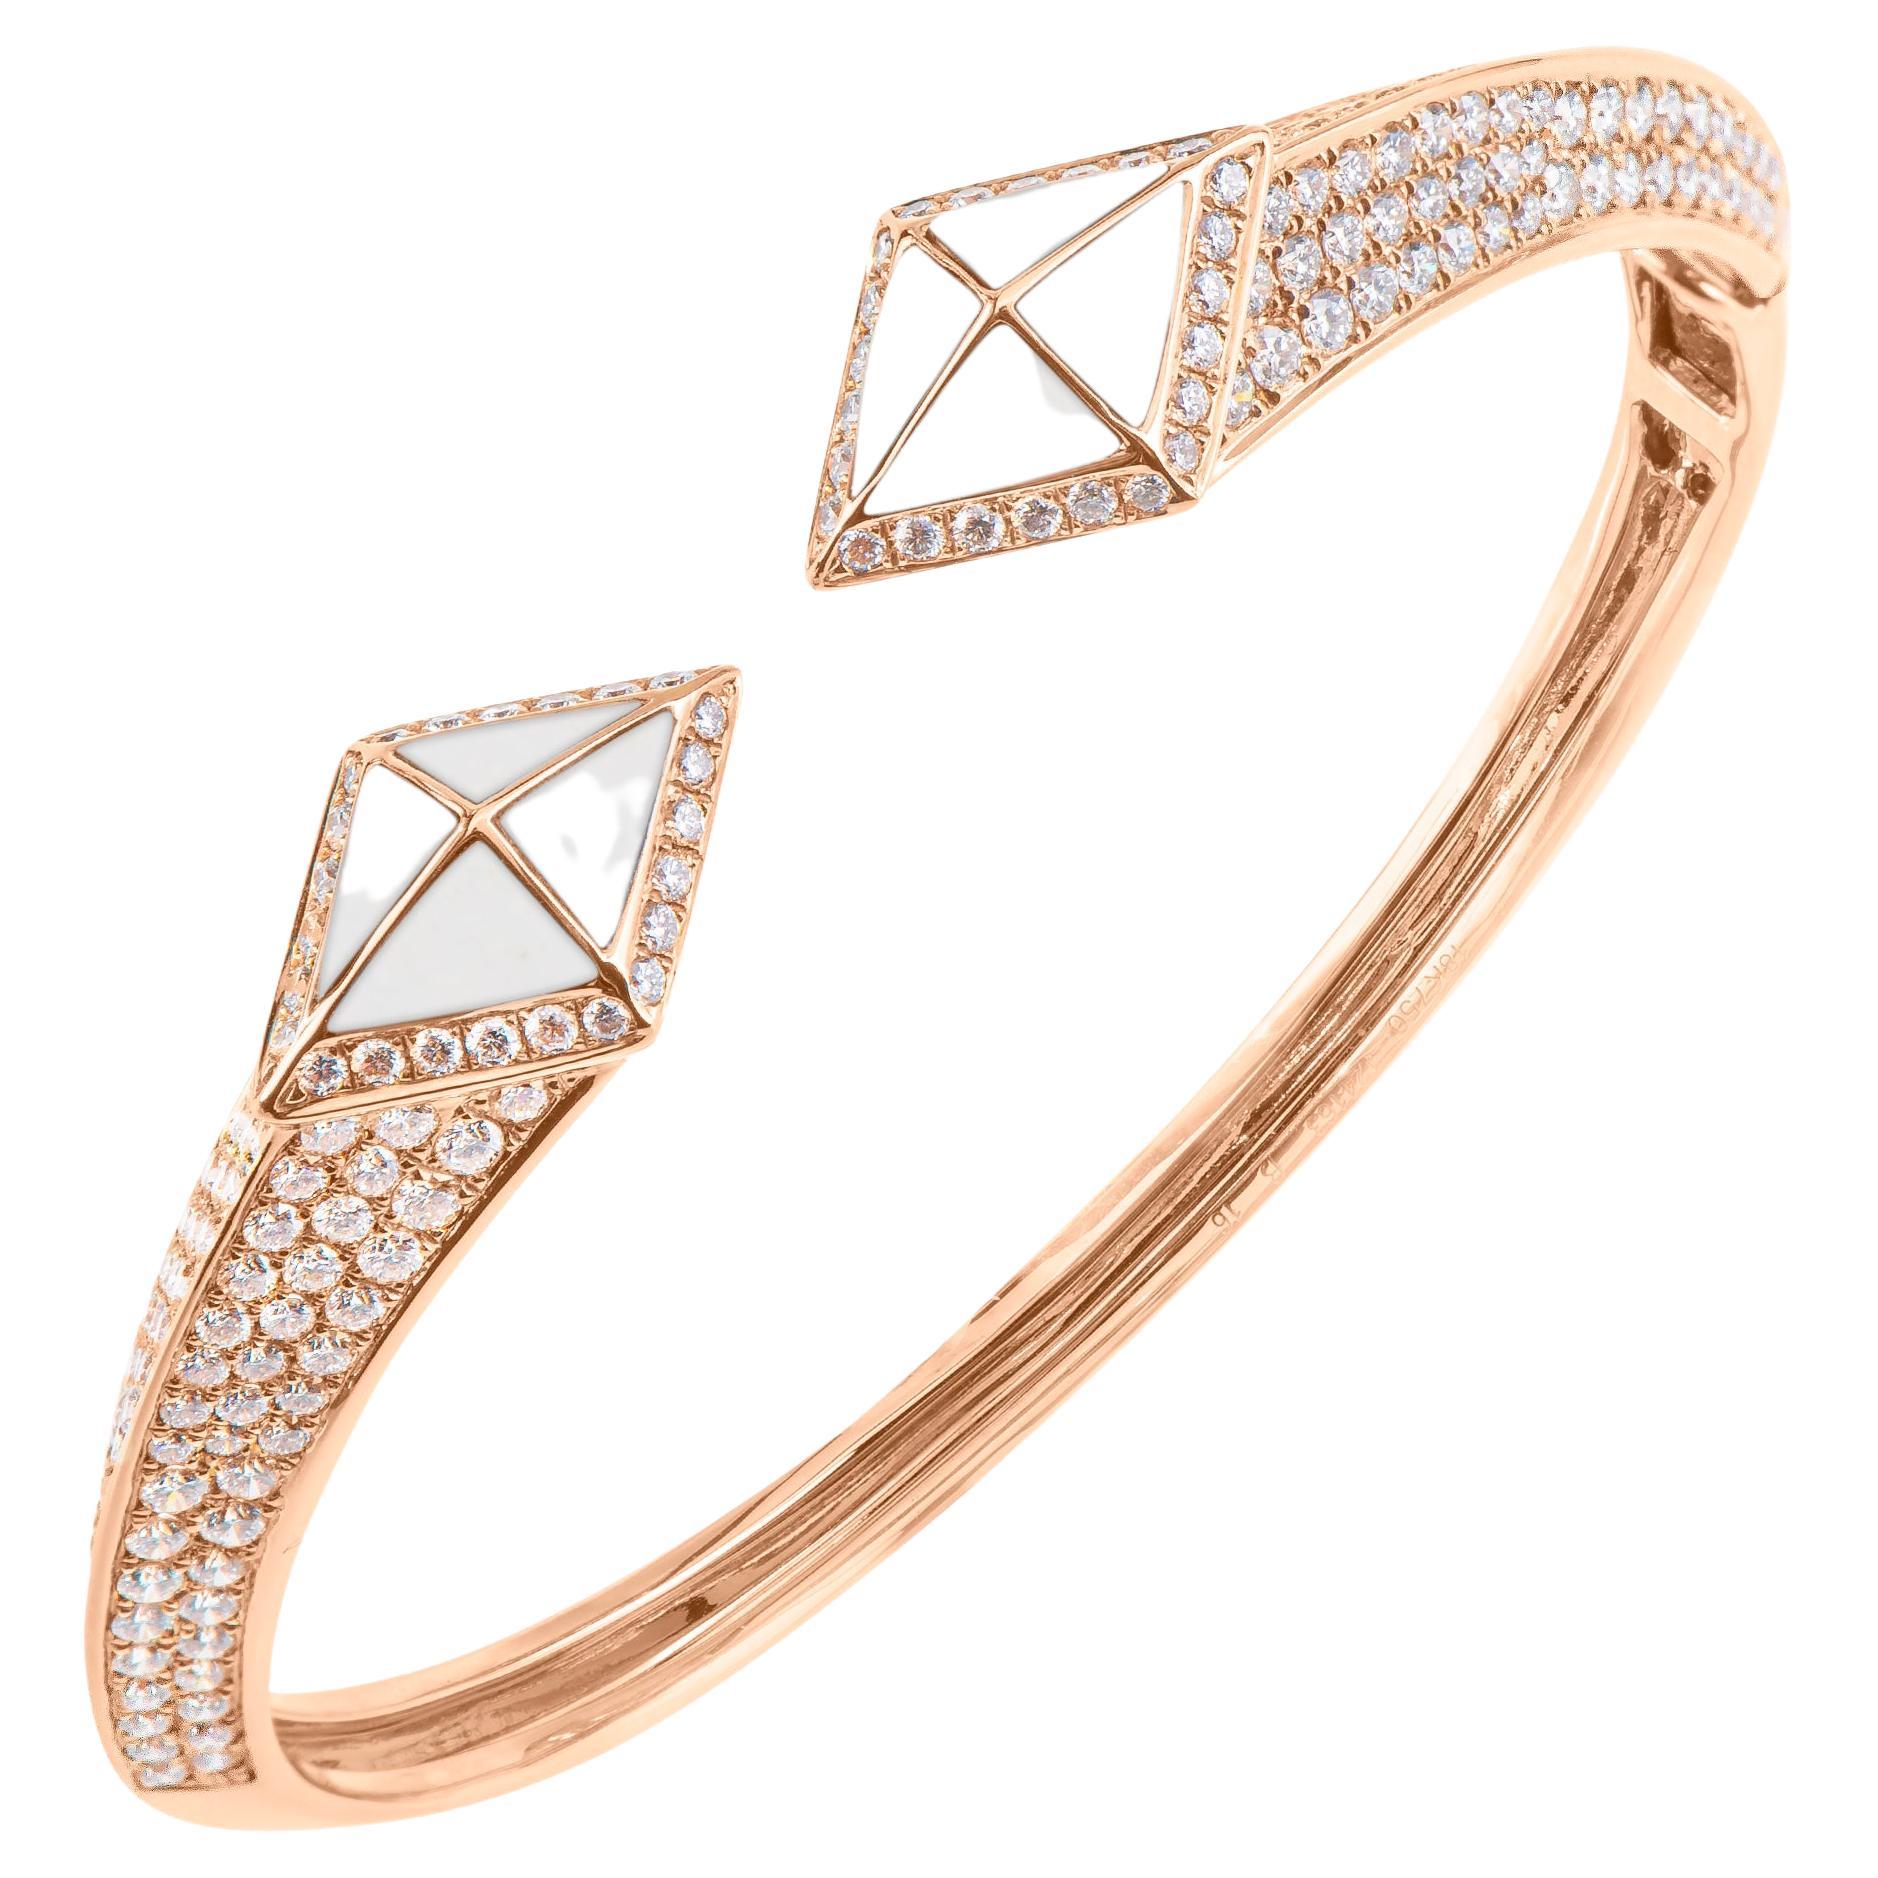 Tetra Hydra Bangle with White Agate and Diamonds in 18k Rose Gold